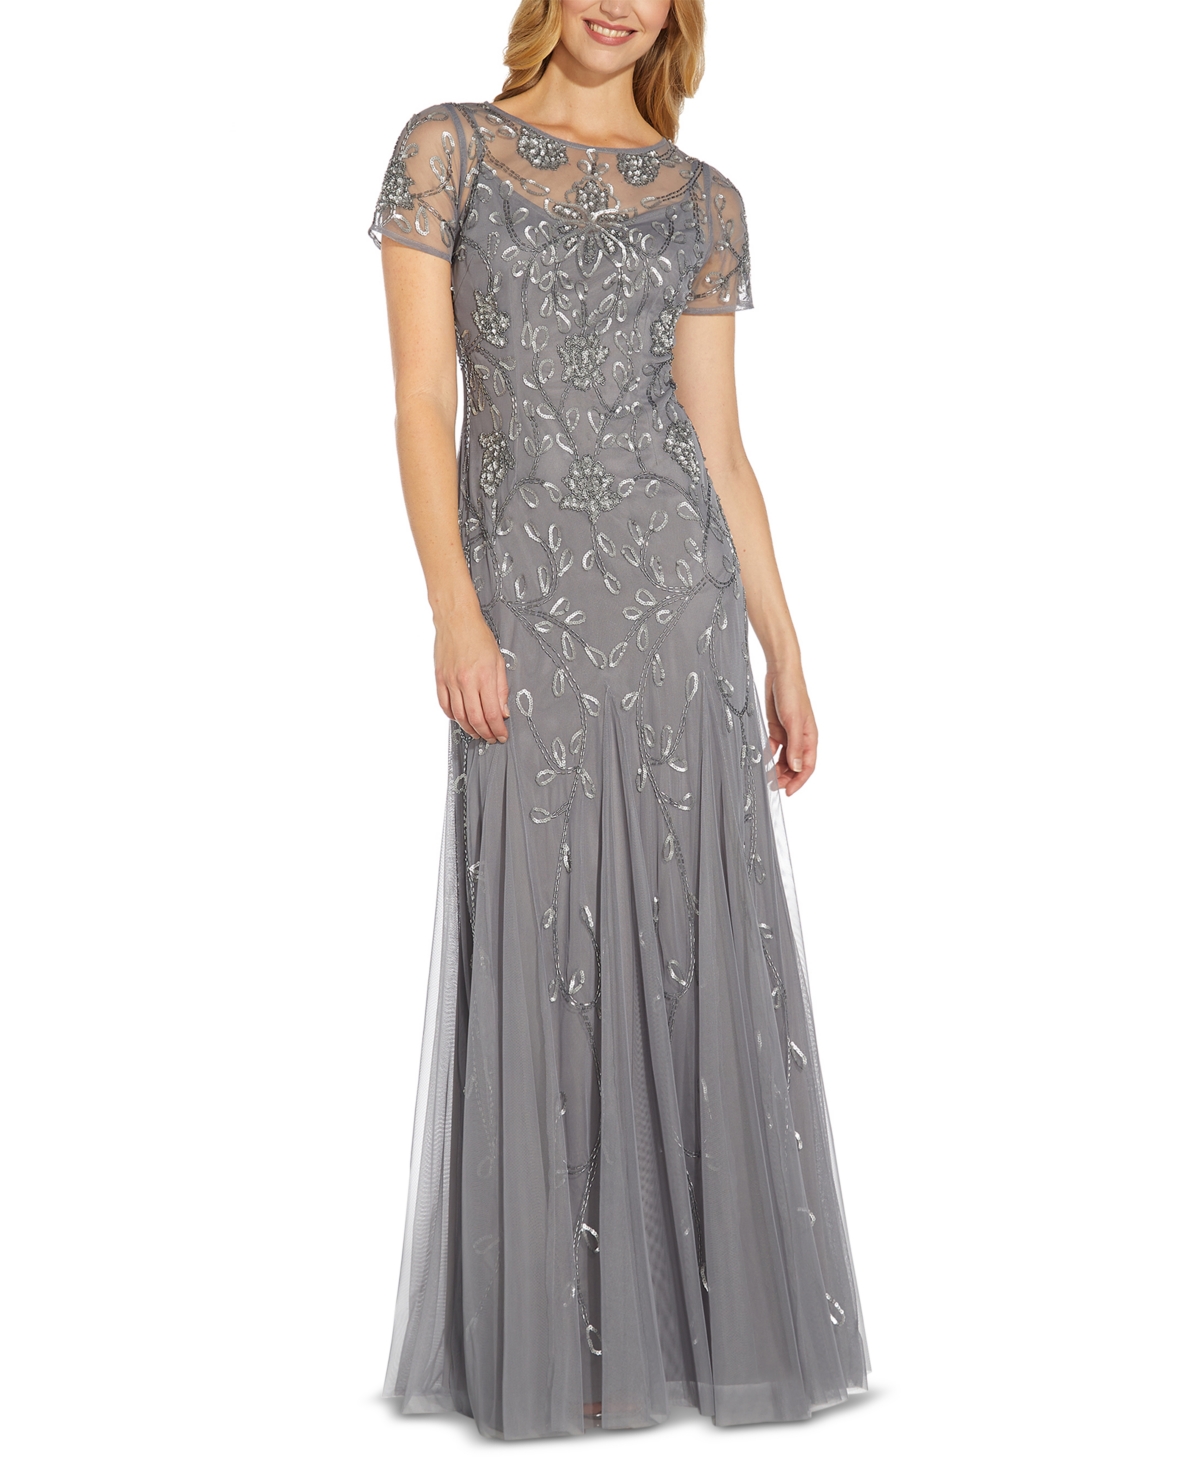 1920s Fashion & Clothing | Roaring 20s Attire Adrianna Papell Beaded Gown $279.00 AT vintagedancer.com